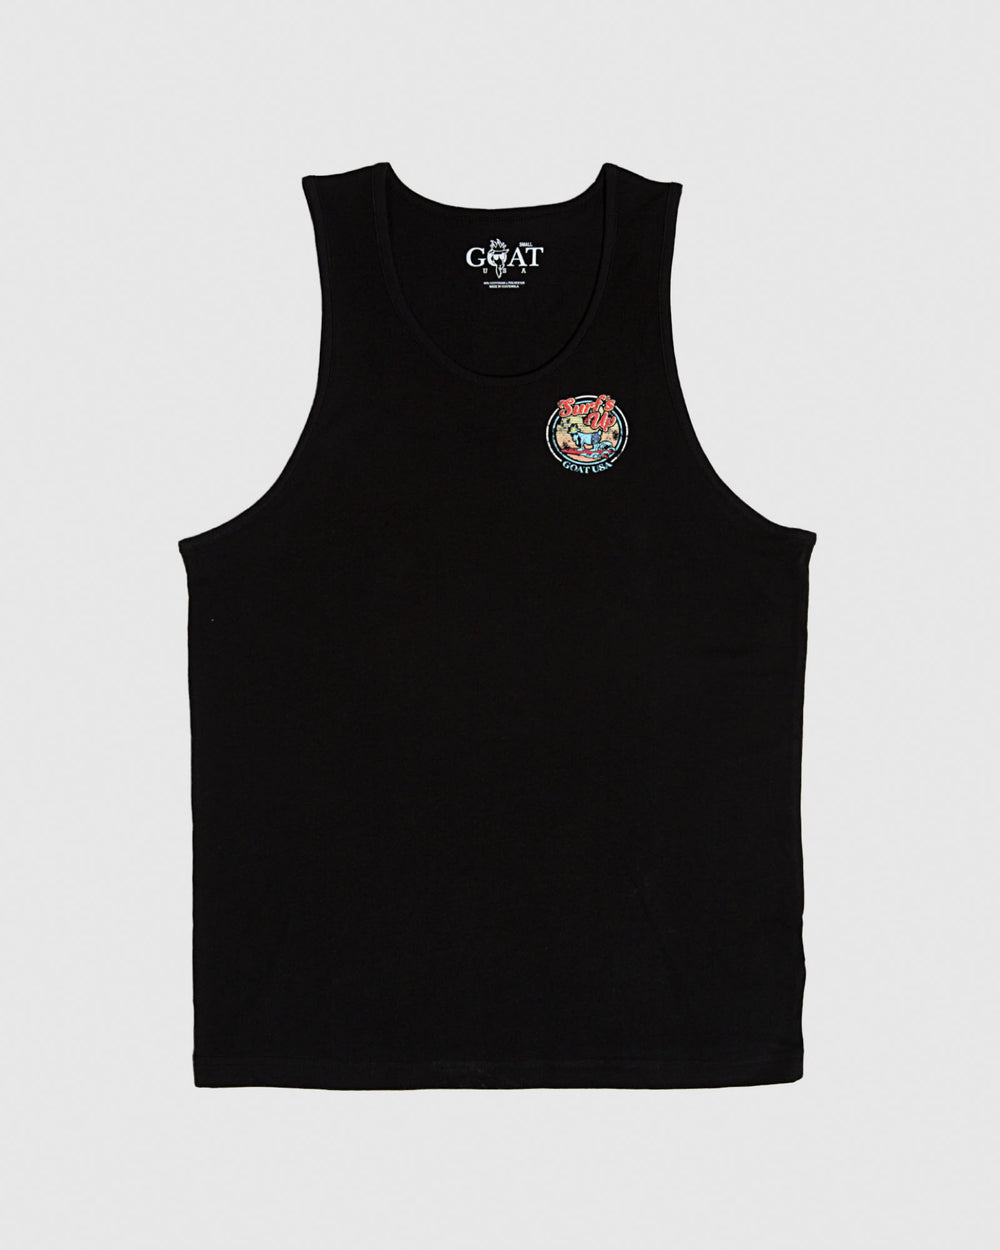 Frontside of black tank top with surfing goat design